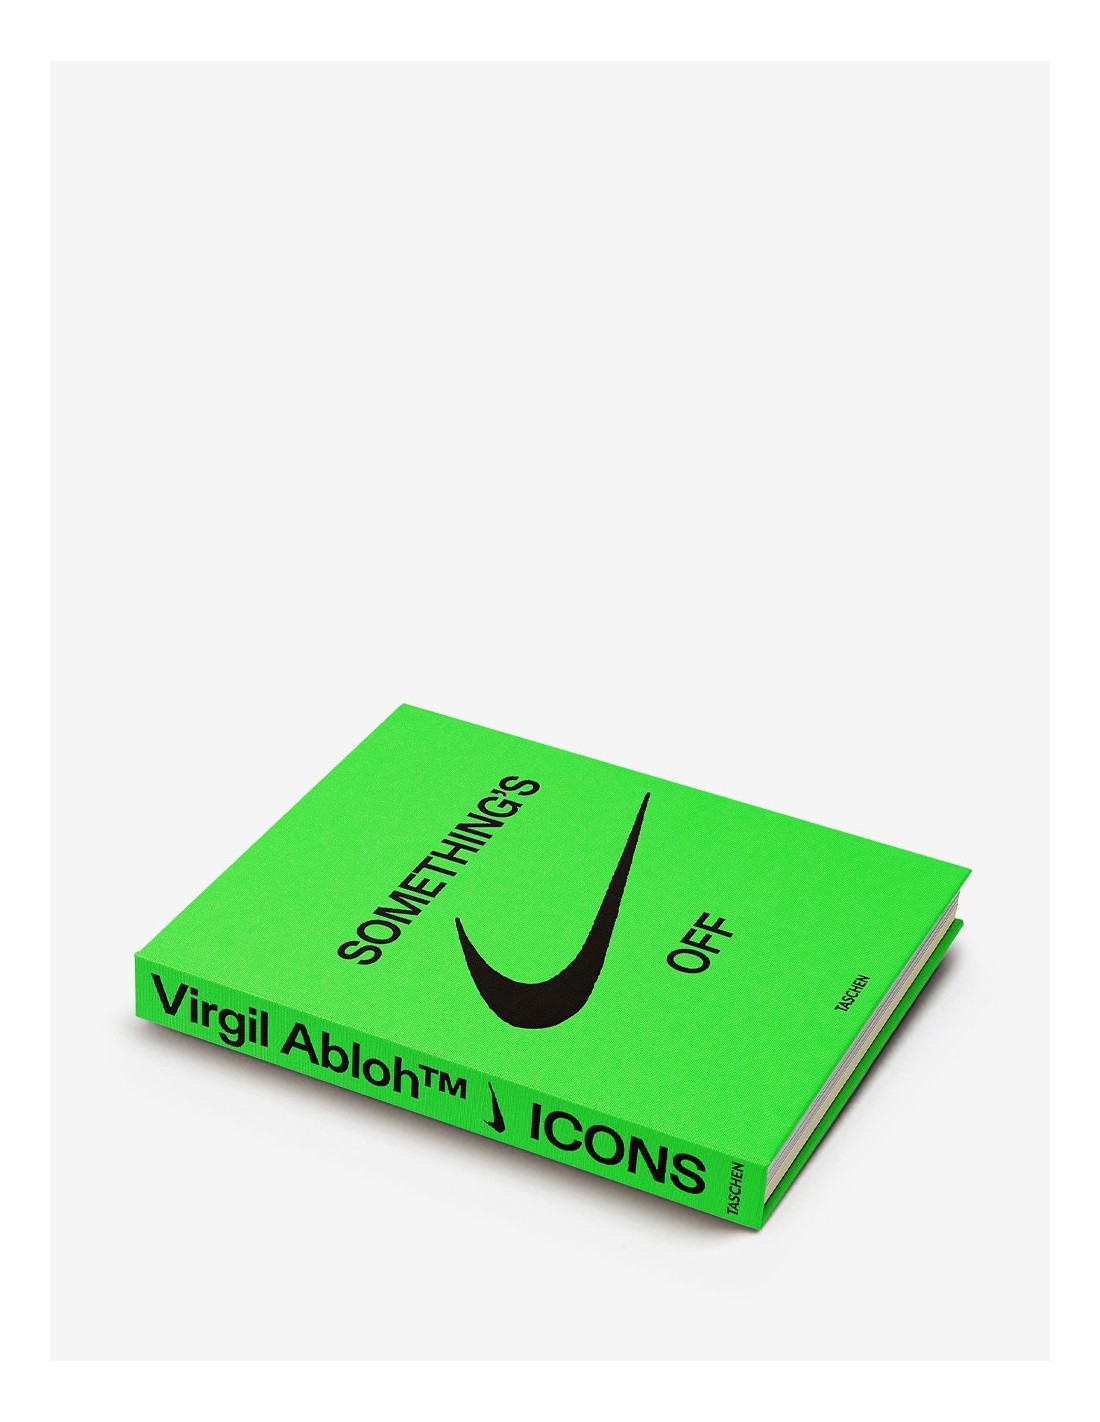 Taschen Virgil Abloh. Nike. Icons - Green Books, Stationery & Pens, Decor &  Accessories - TASCH29369